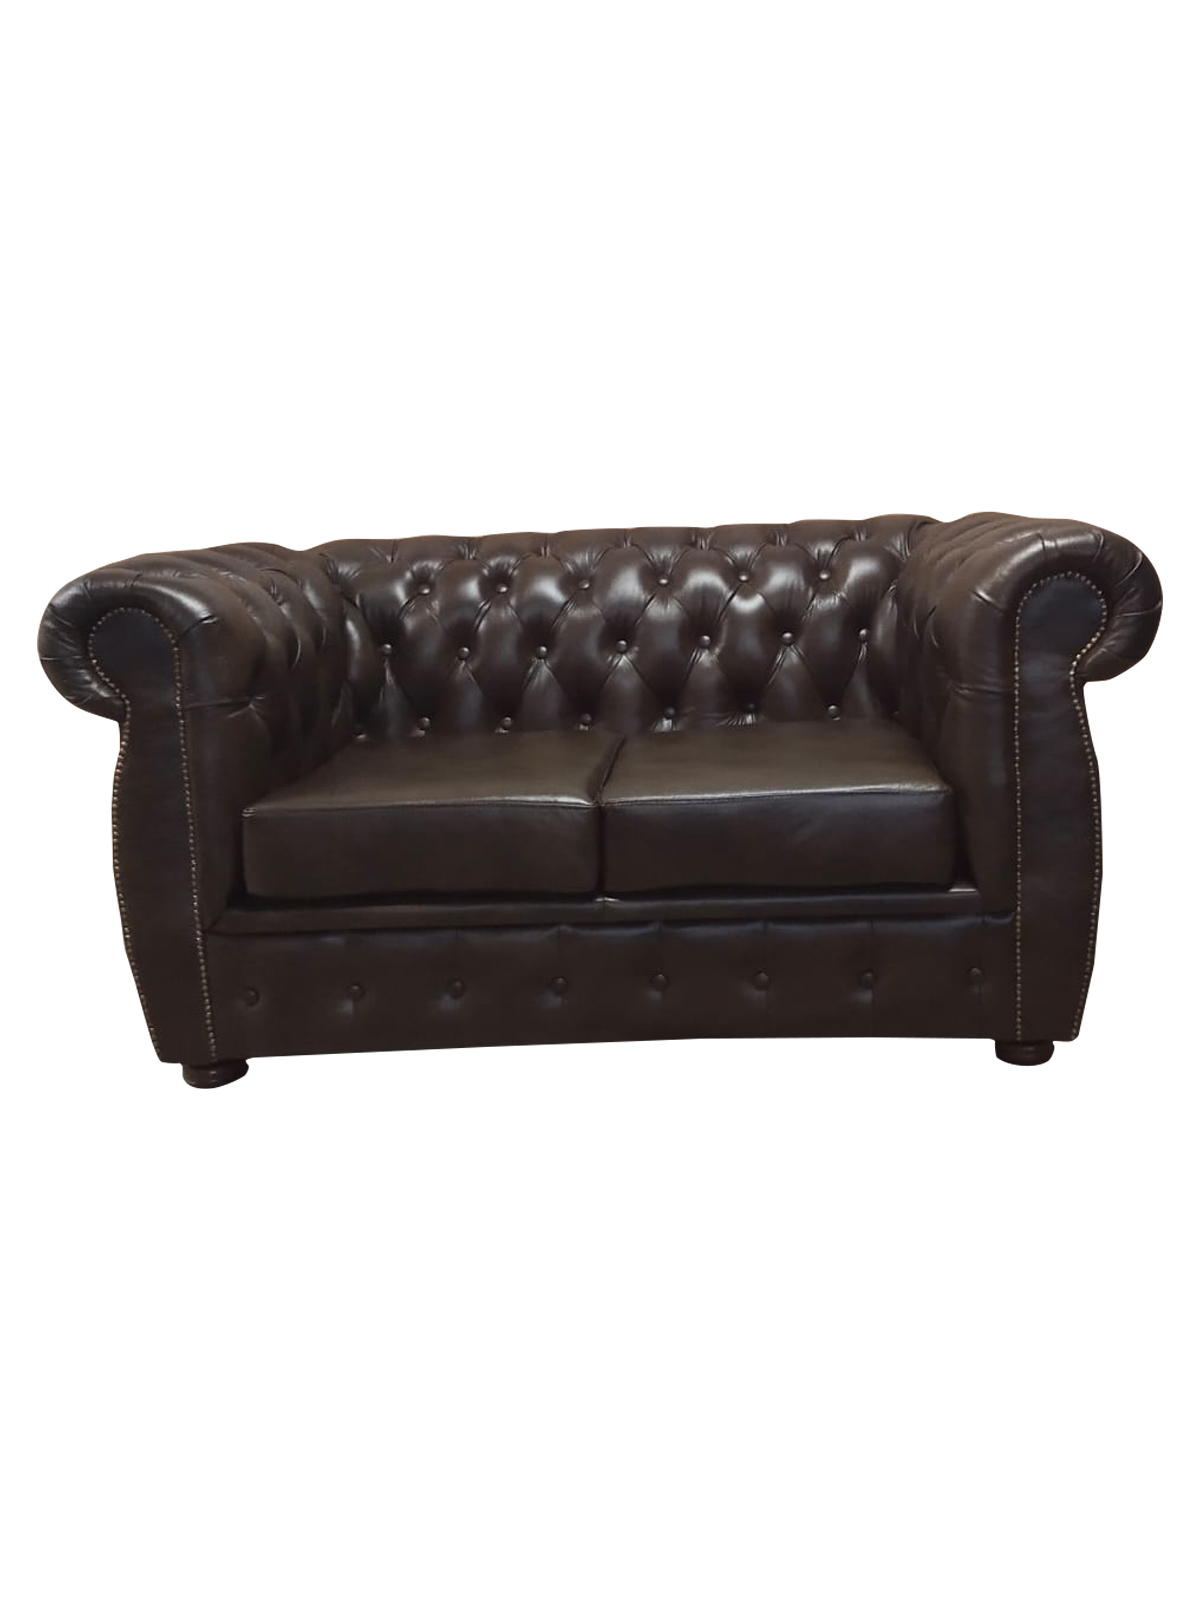 Chesterfield Sofa 2 Seat Luxury Couch Two Seater Sofas Brown Furniture Couches